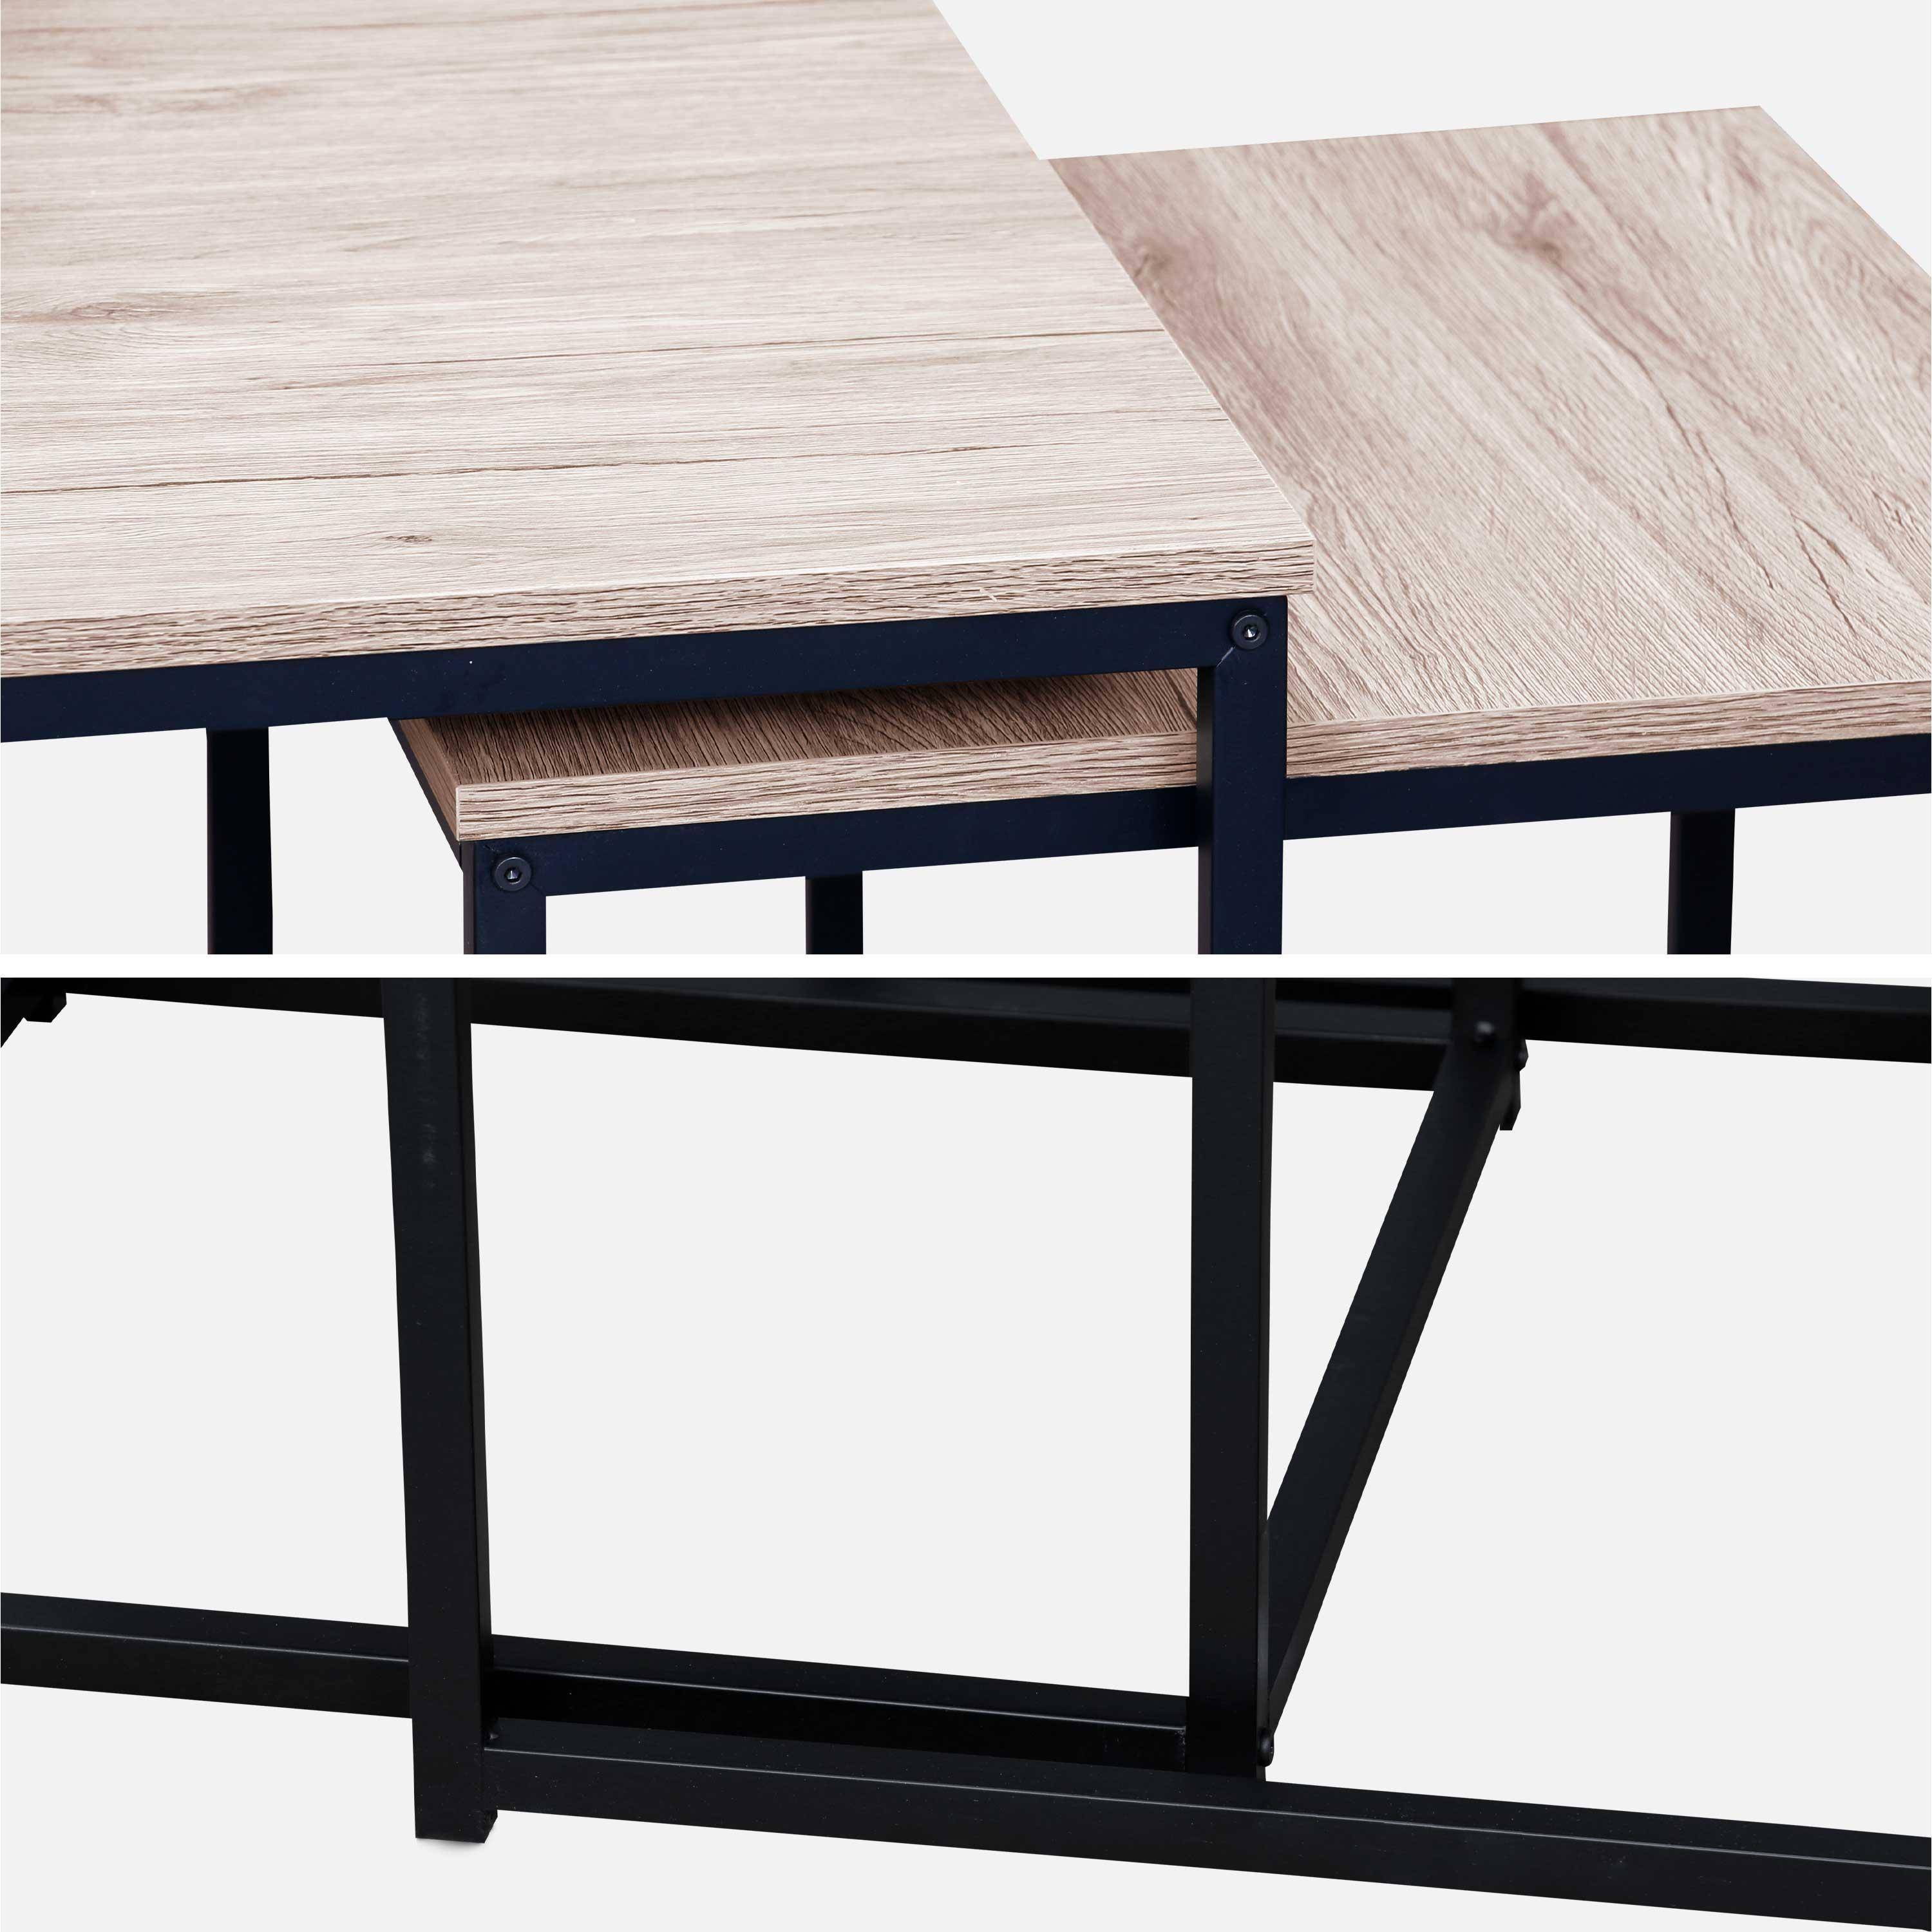 Set of 3 metal and wood-effect nesting tables, large table 100x60x45cm, 2x small tables 50x50x38cm - Loft - Black Photo8